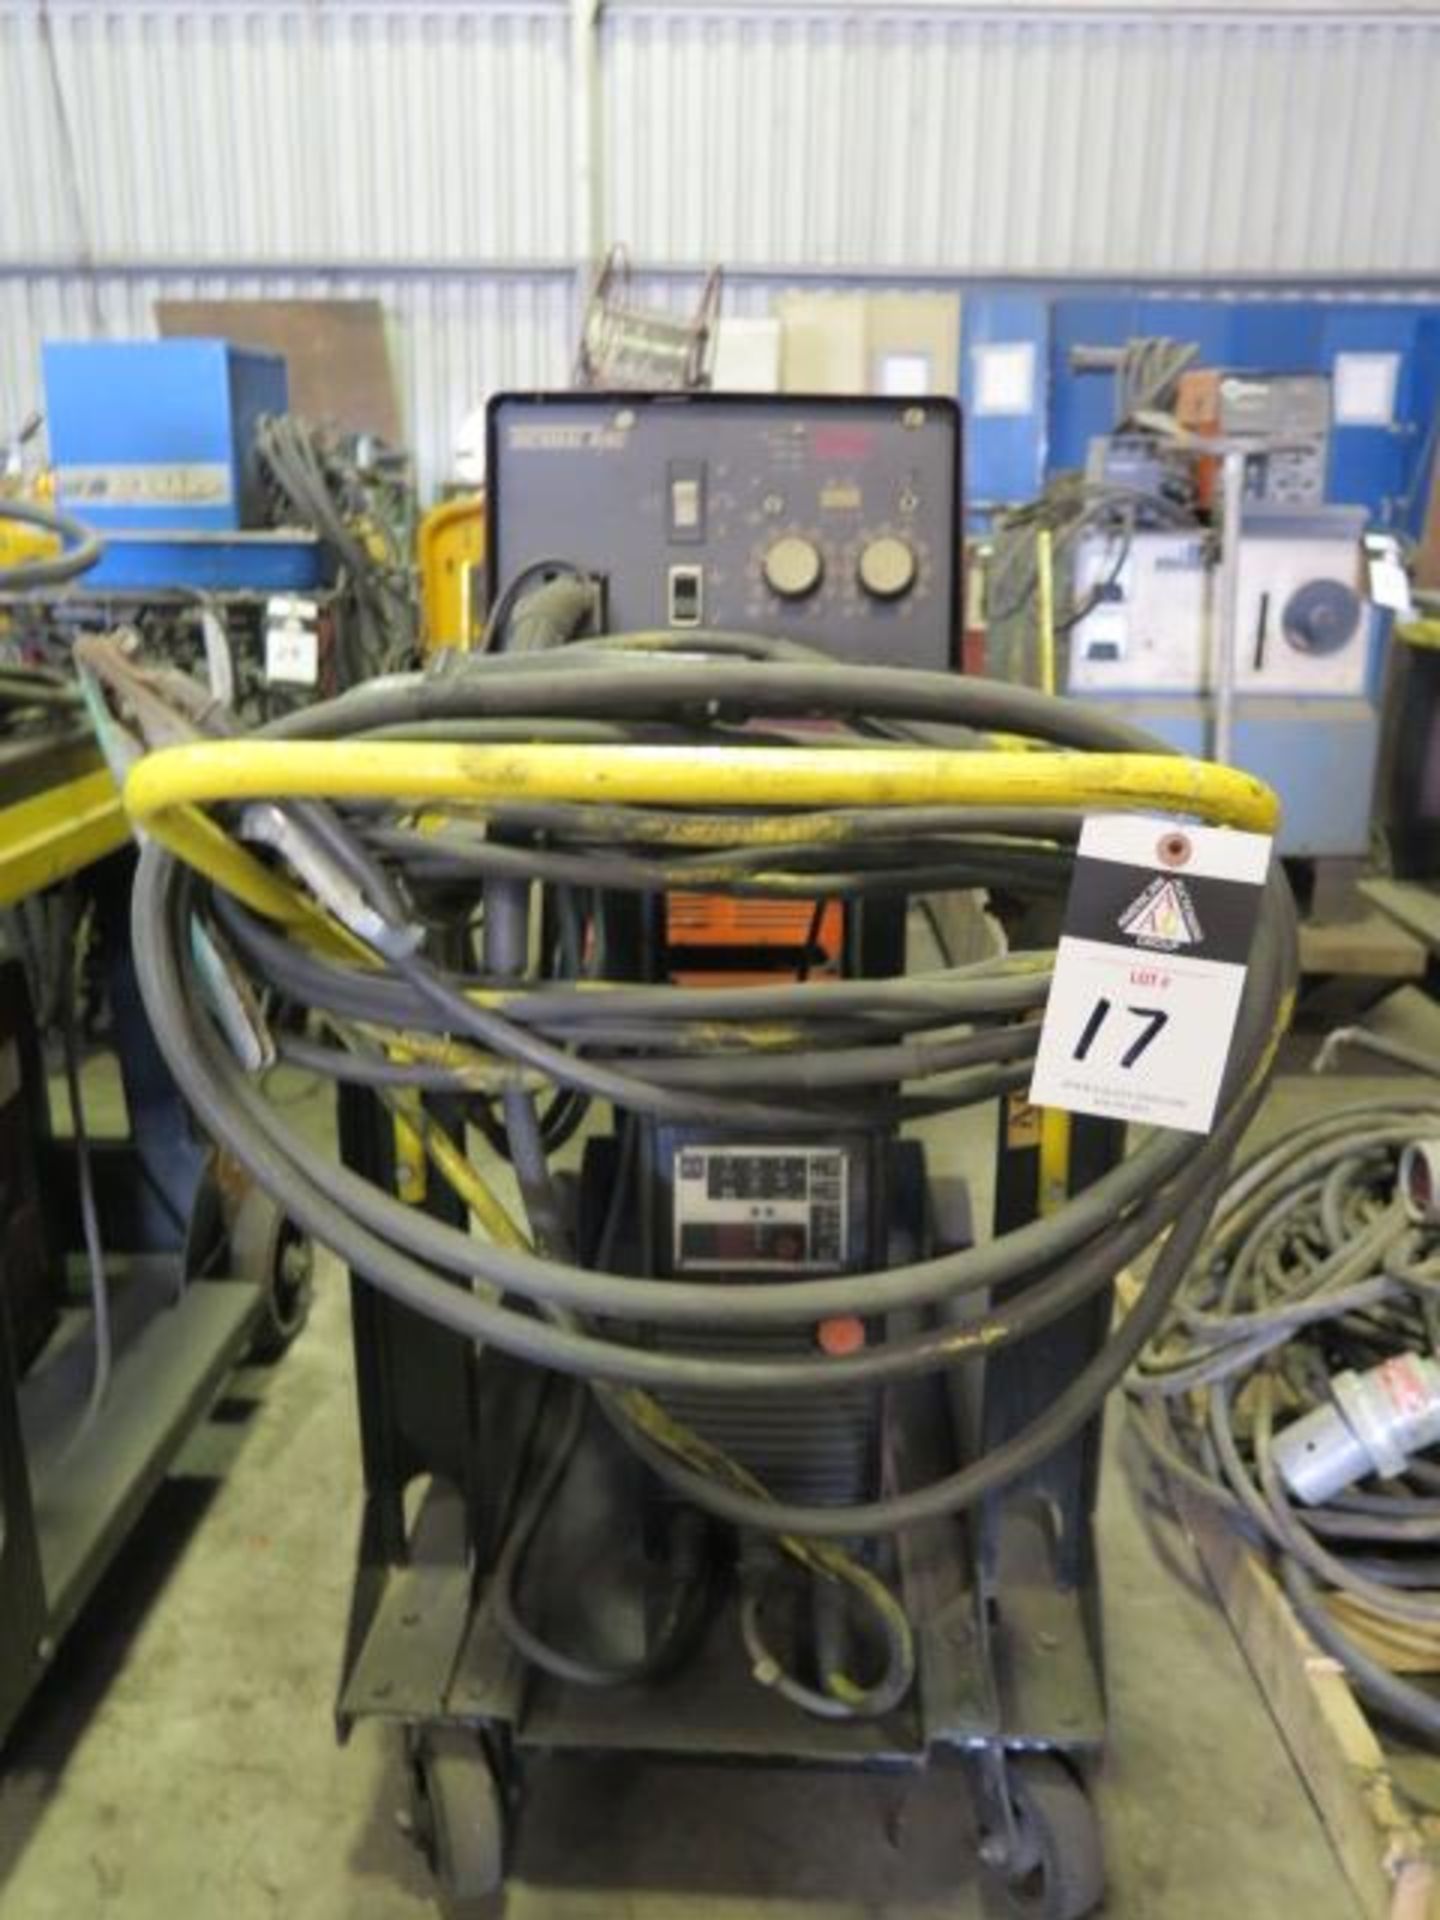 Thermal Arc 400MST Arc Welding Power Source w/ VA2000 Wire Feed (SOLD AS-IS - NO WARRANTY)